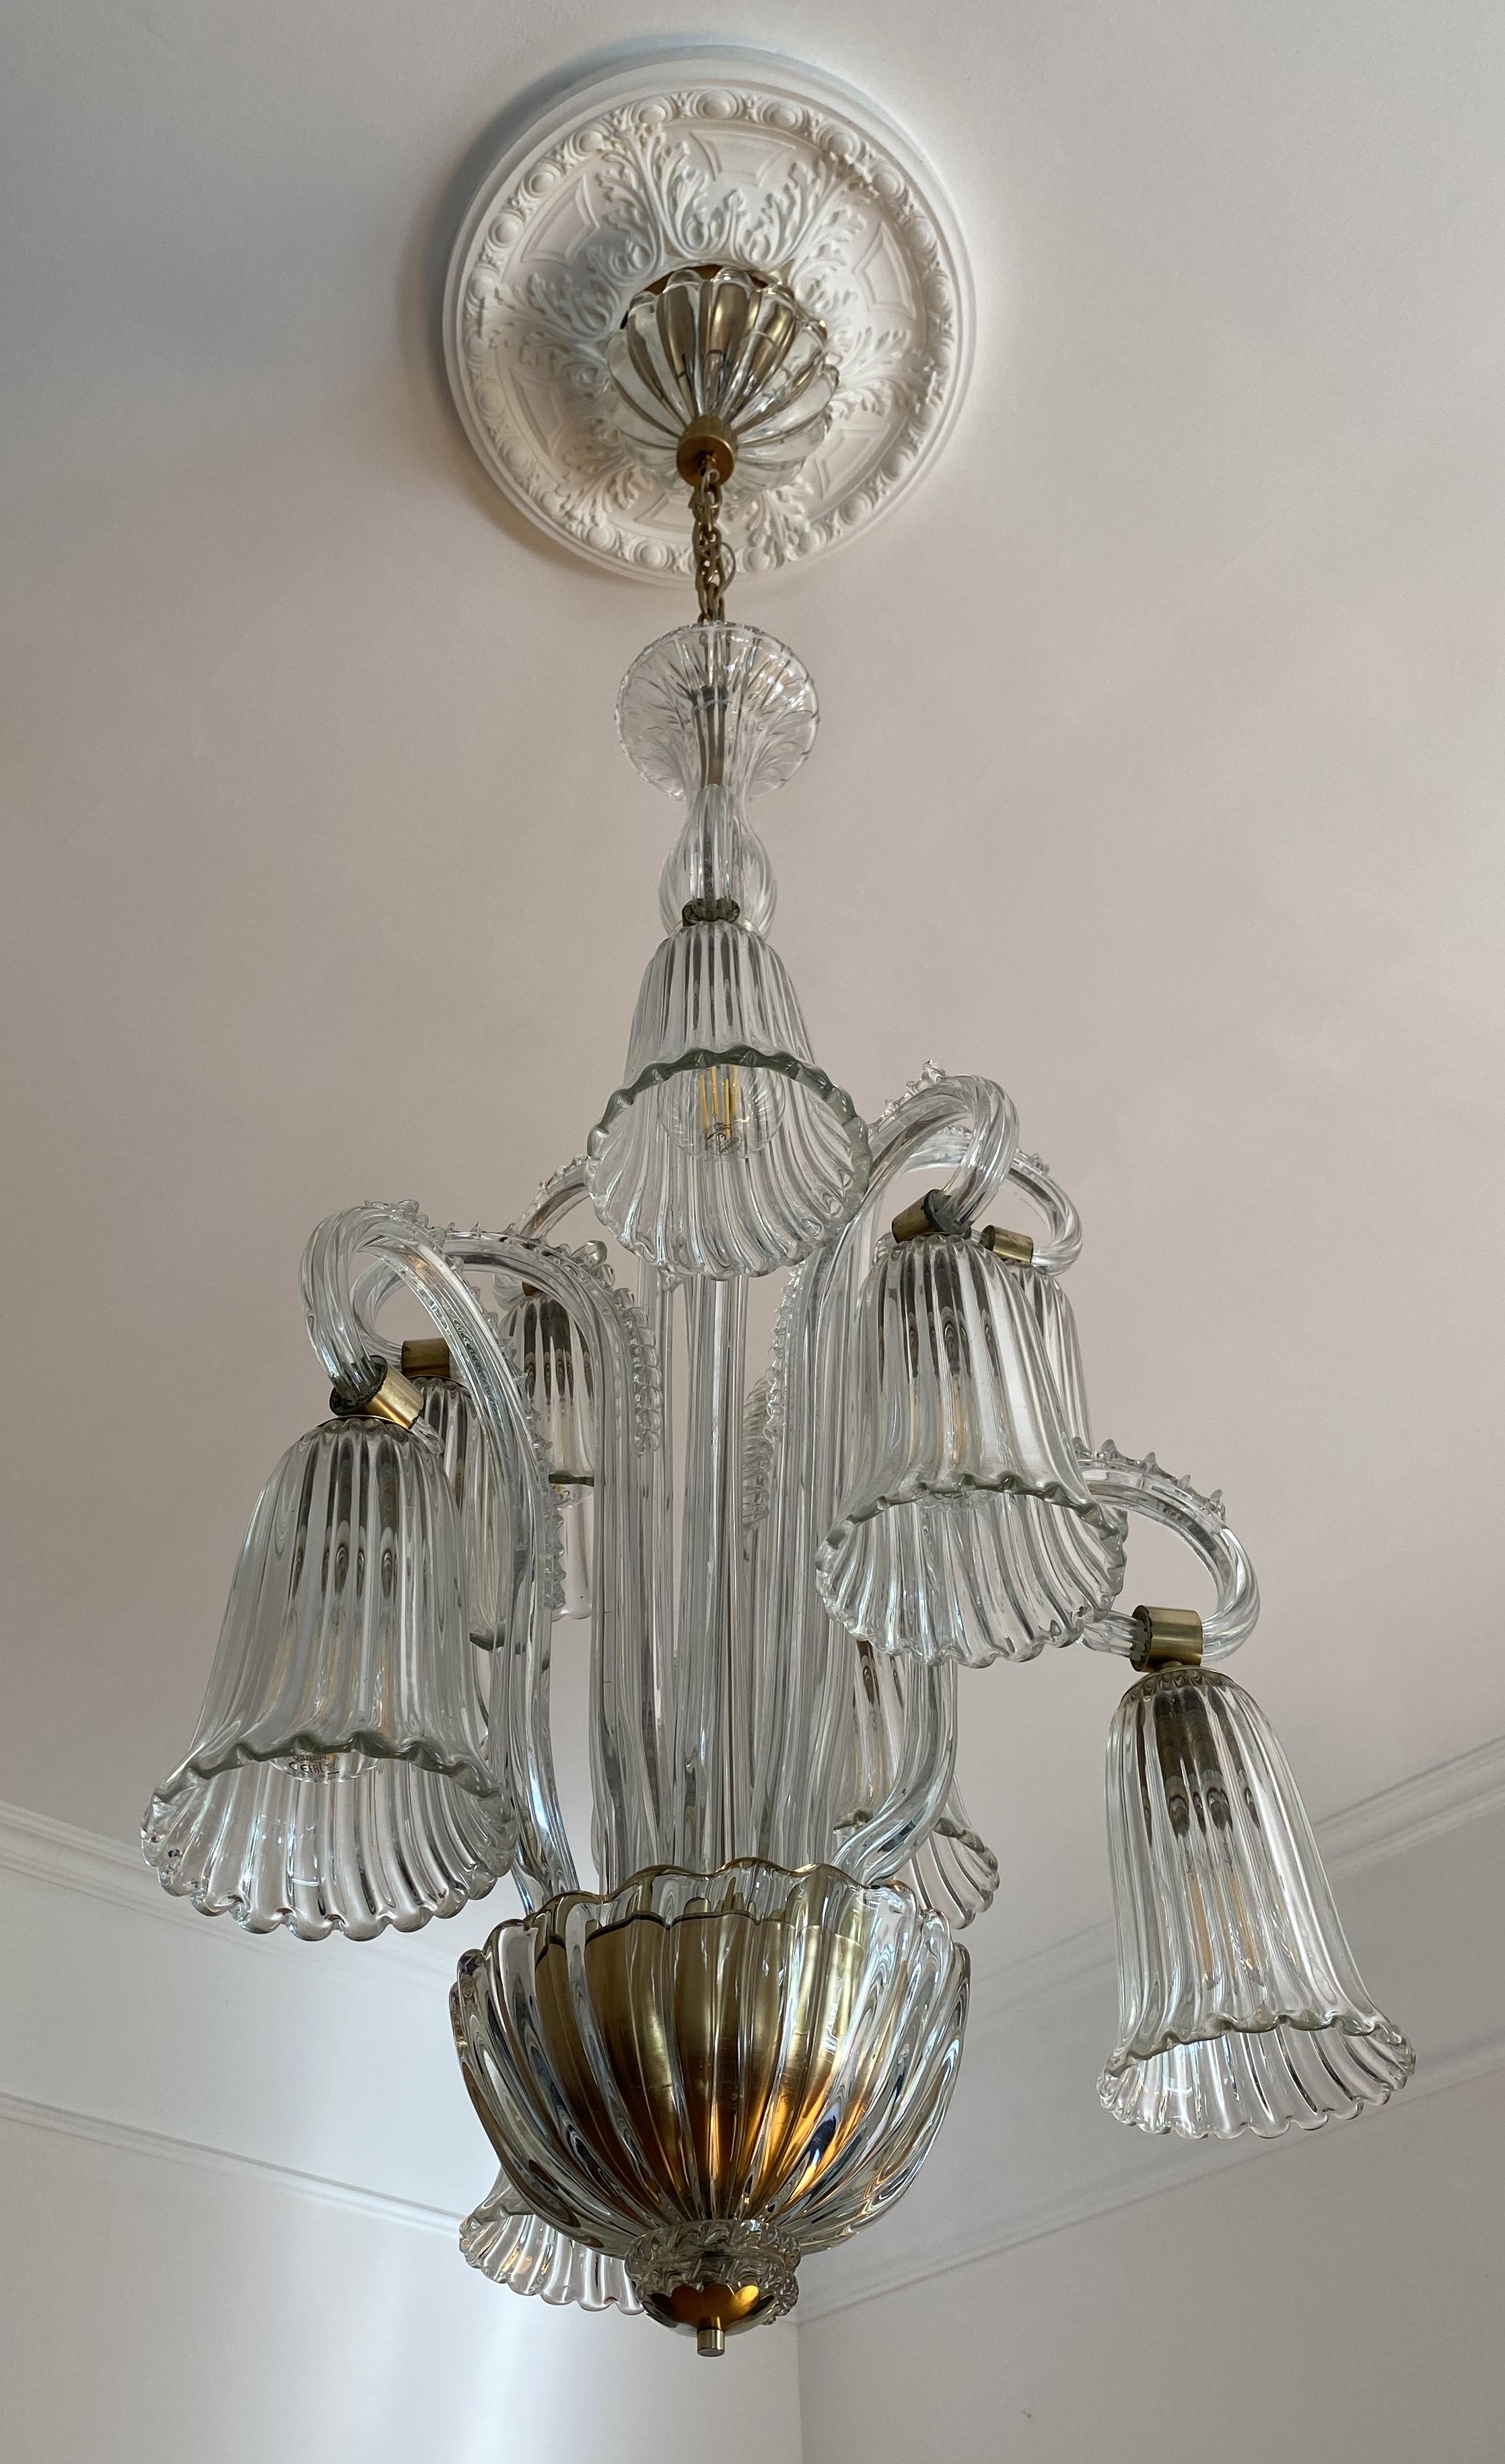 Brass Charming Italian Chandelier by Ercole Barovier, Murano, 1940s For Sale